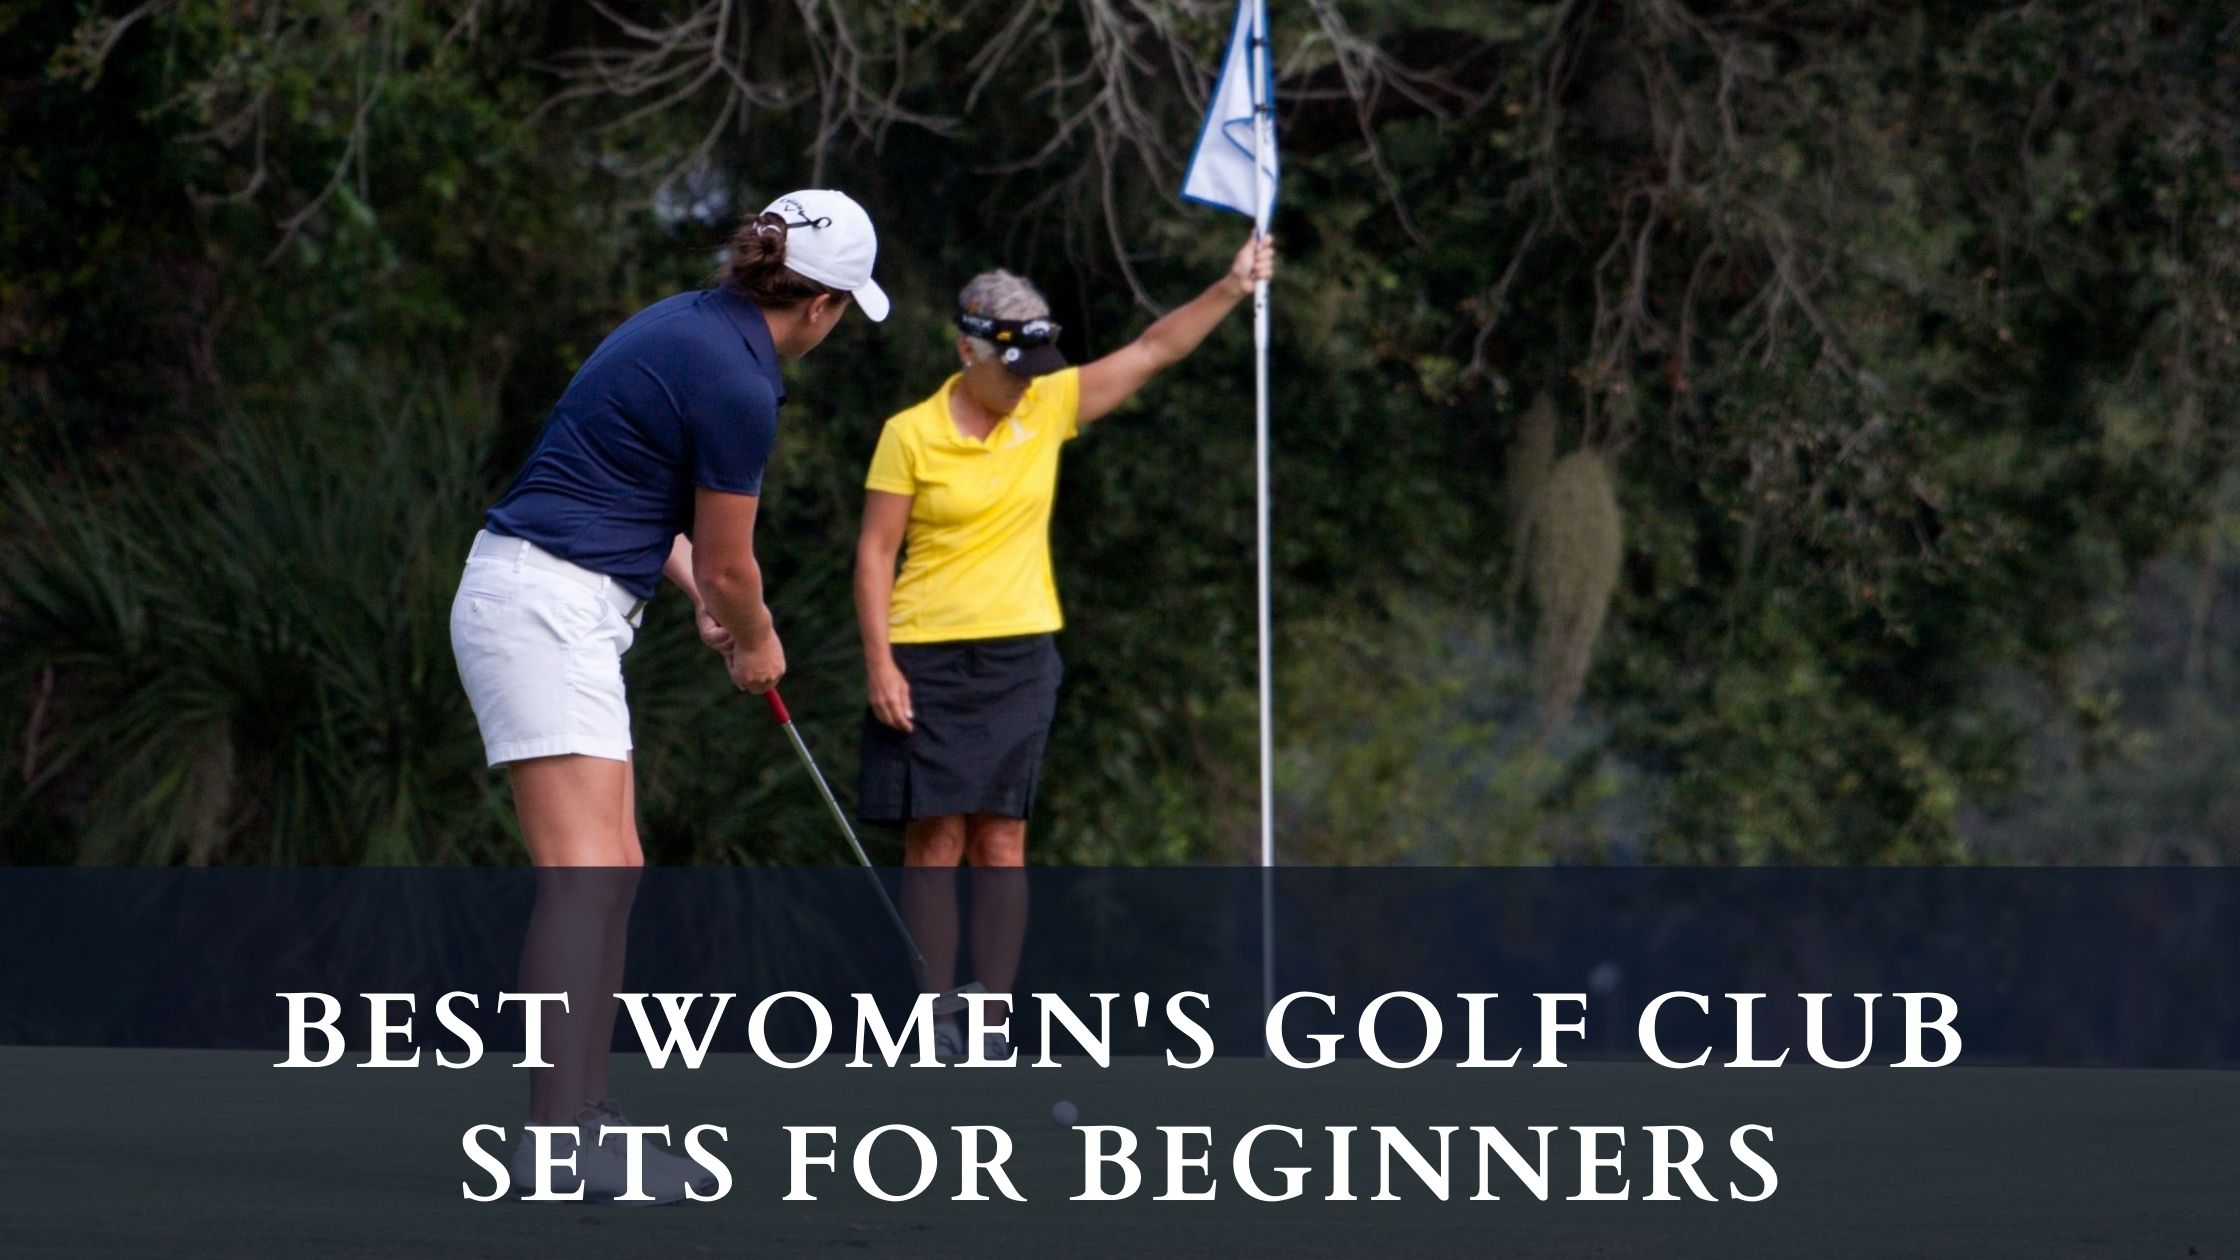 Best Womens Golf Club Sets for Beginners